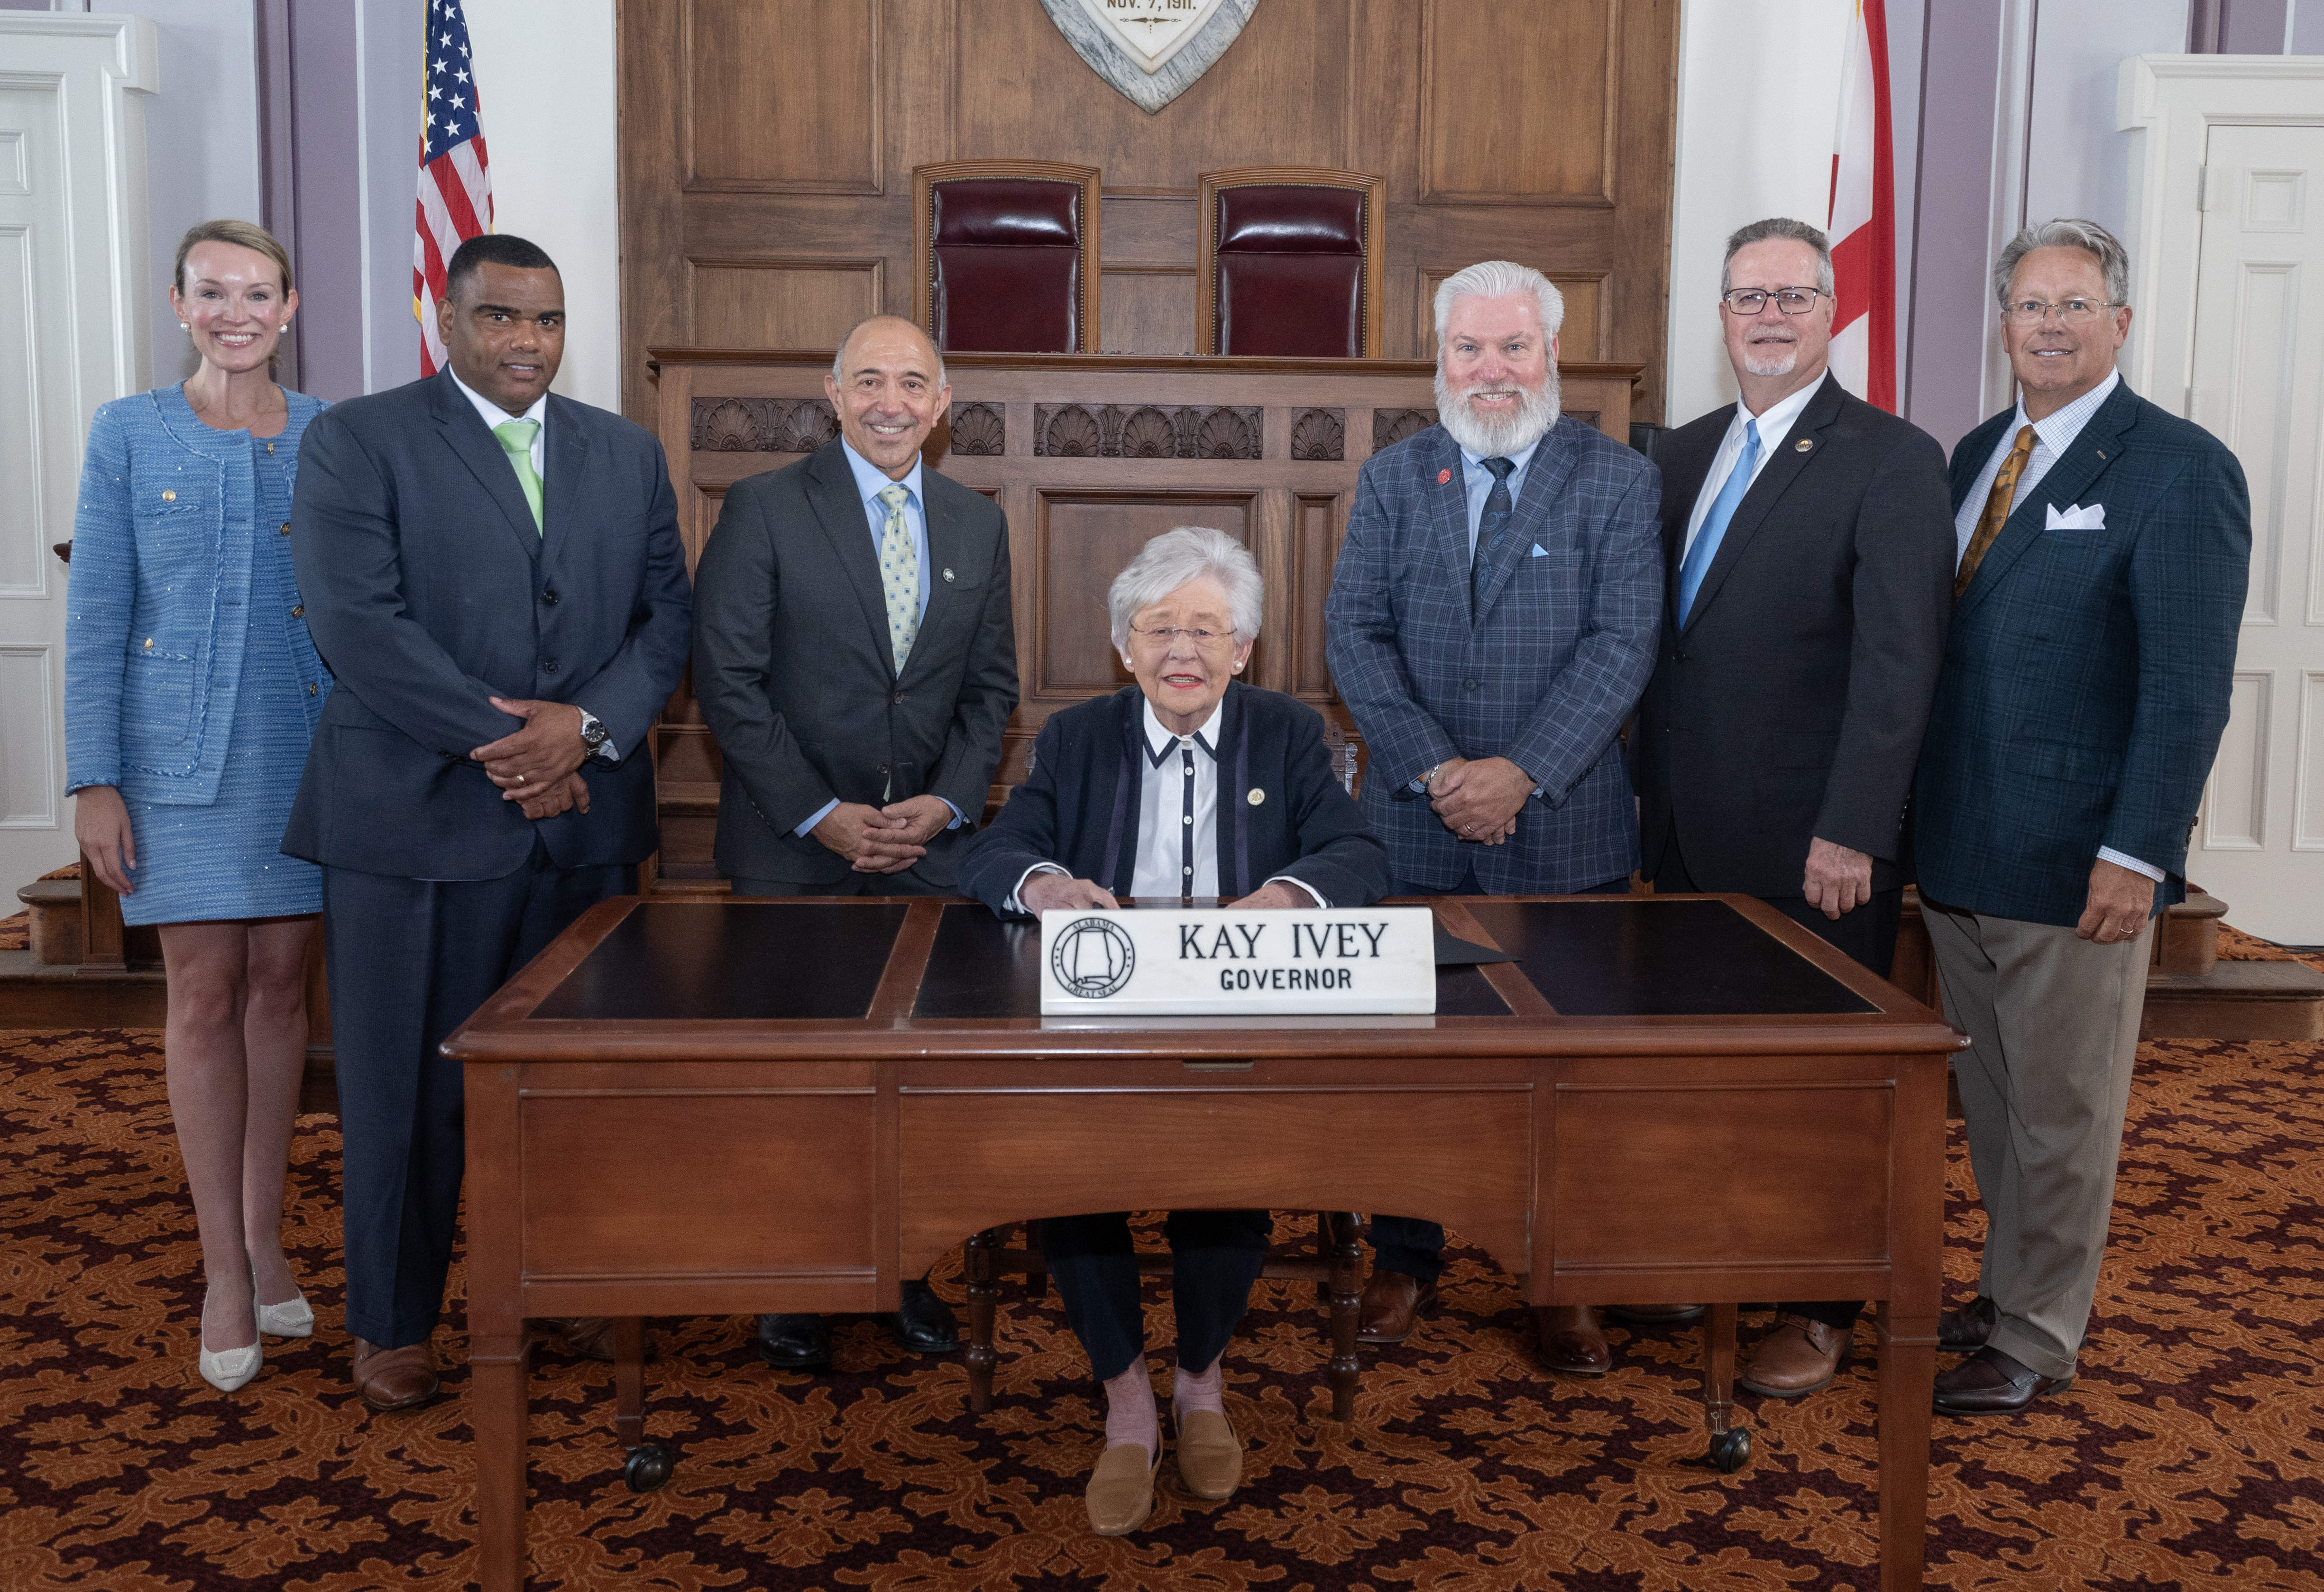 Gov. Kay Ivey Proclaims Municipal Government Week in Alabama